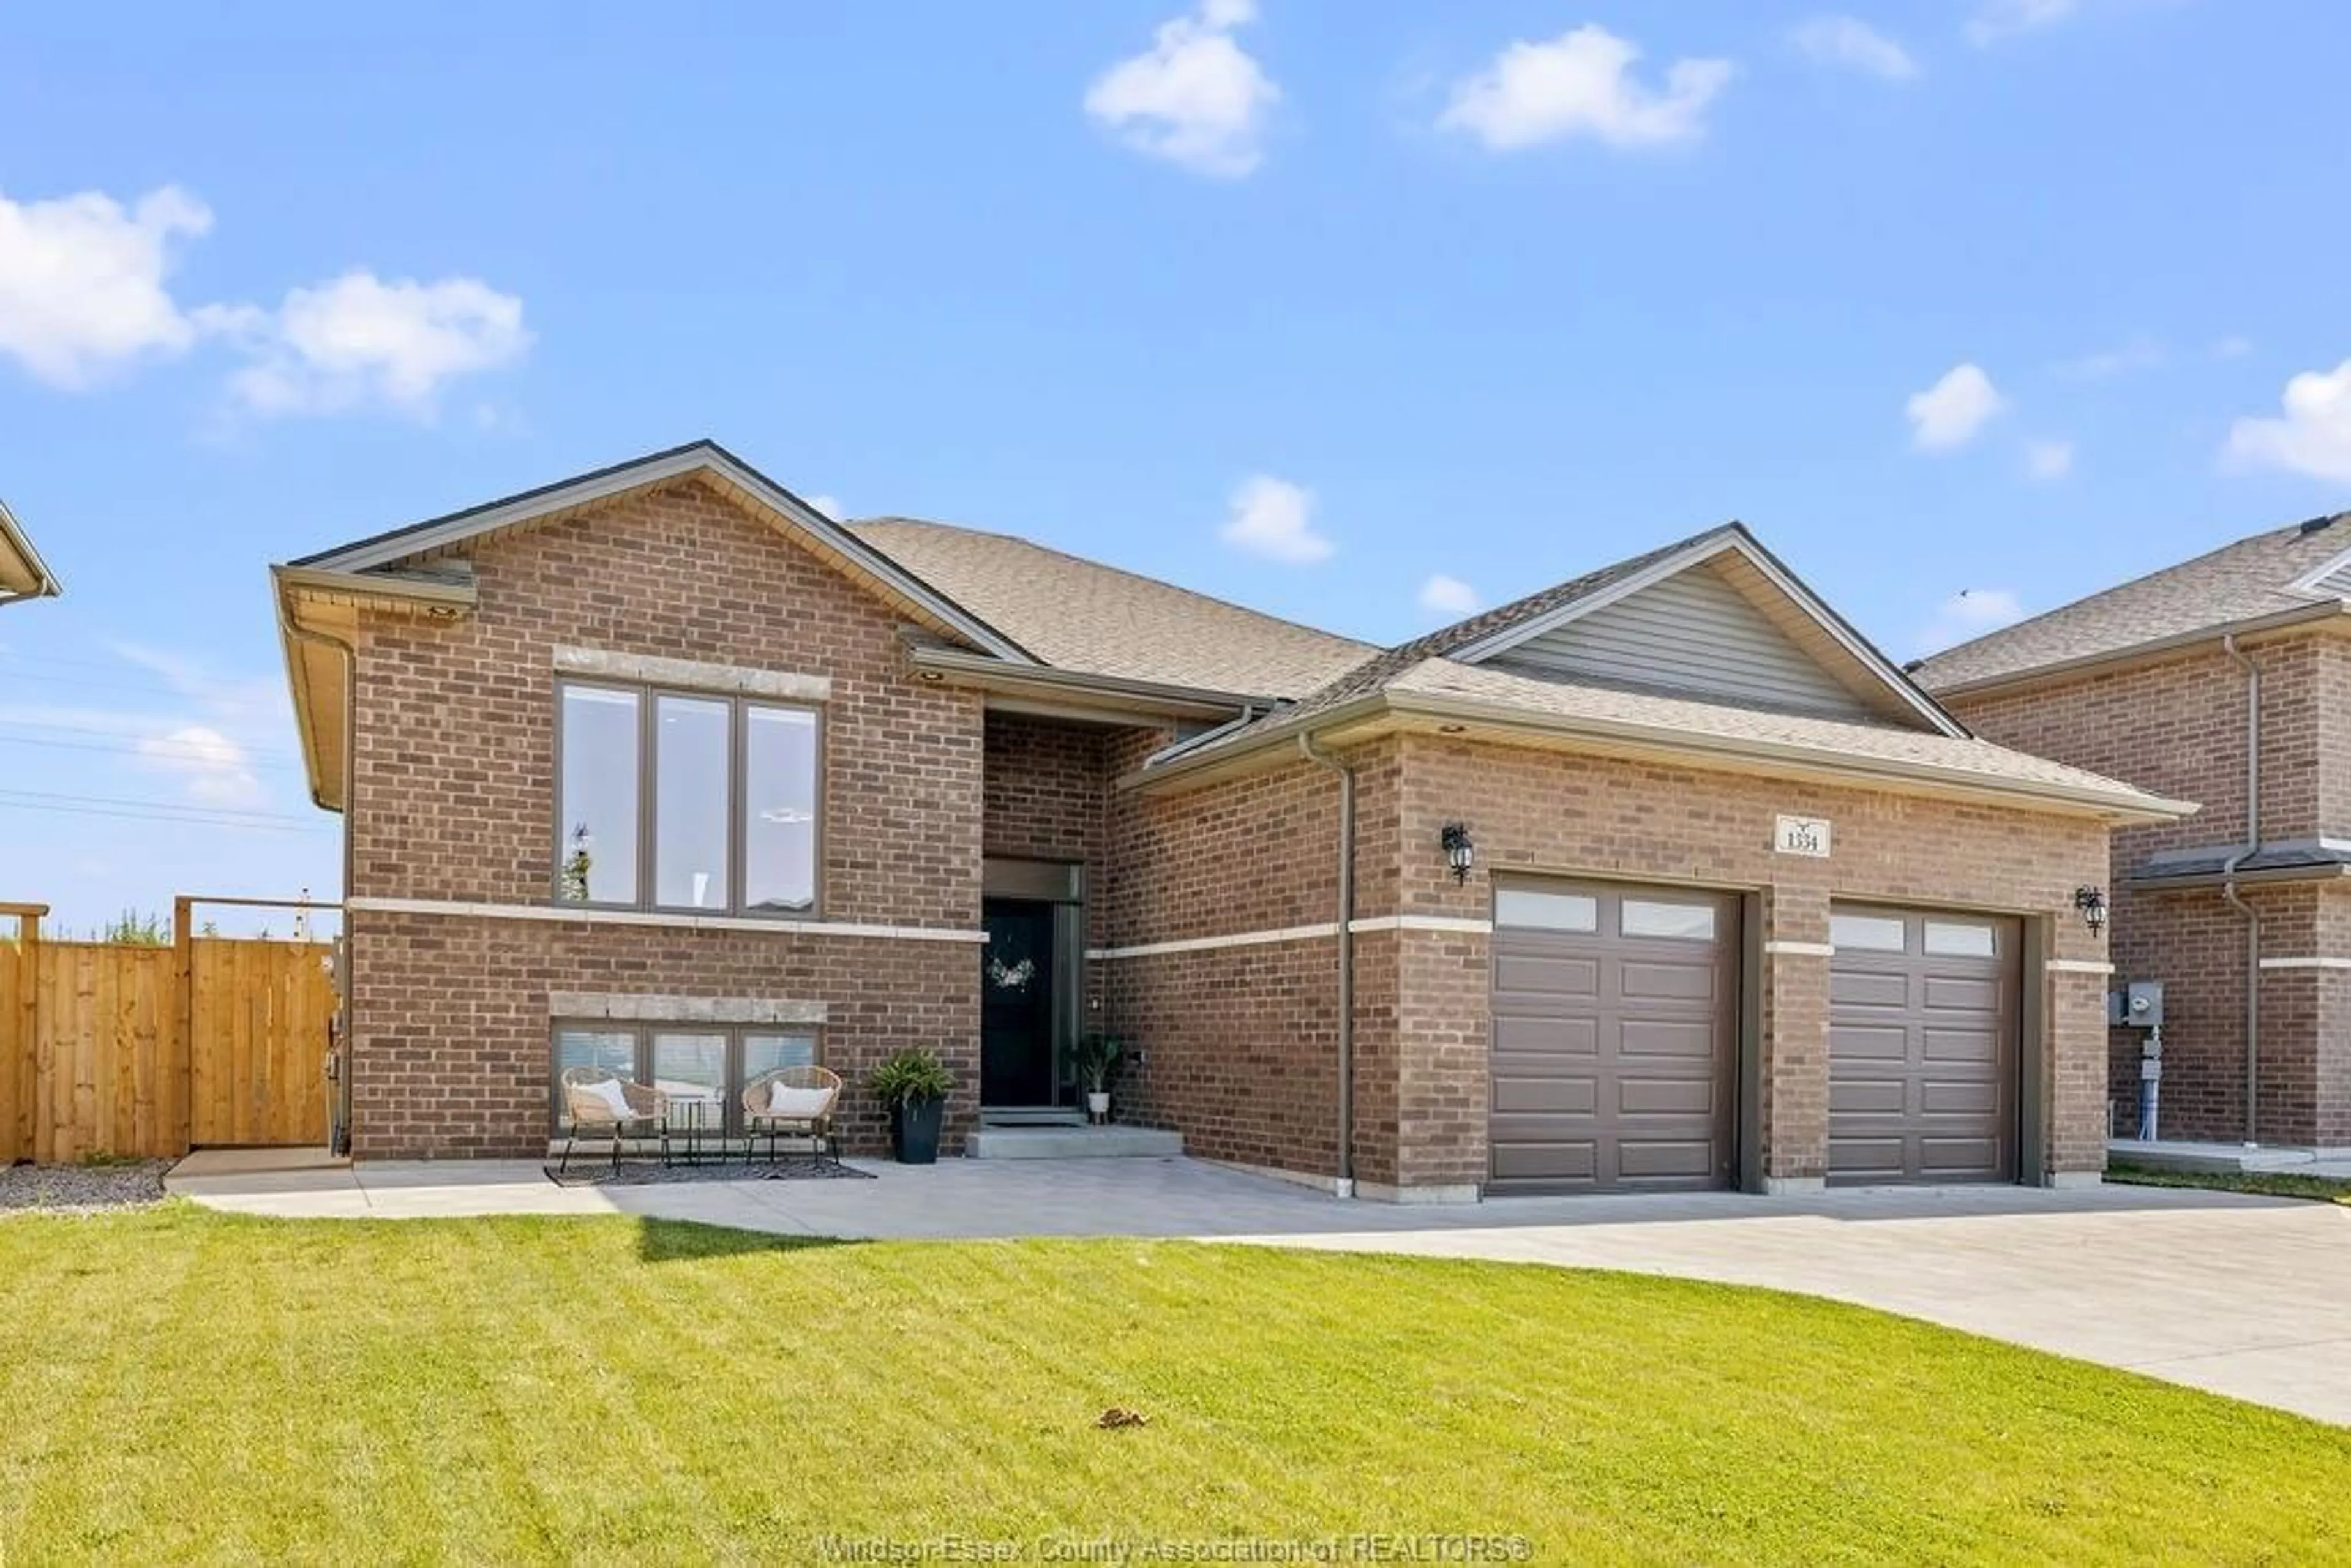 Home with brick exterior material for 1334 Deer Run Trail, Lakeshore Ontario N0R 1A0